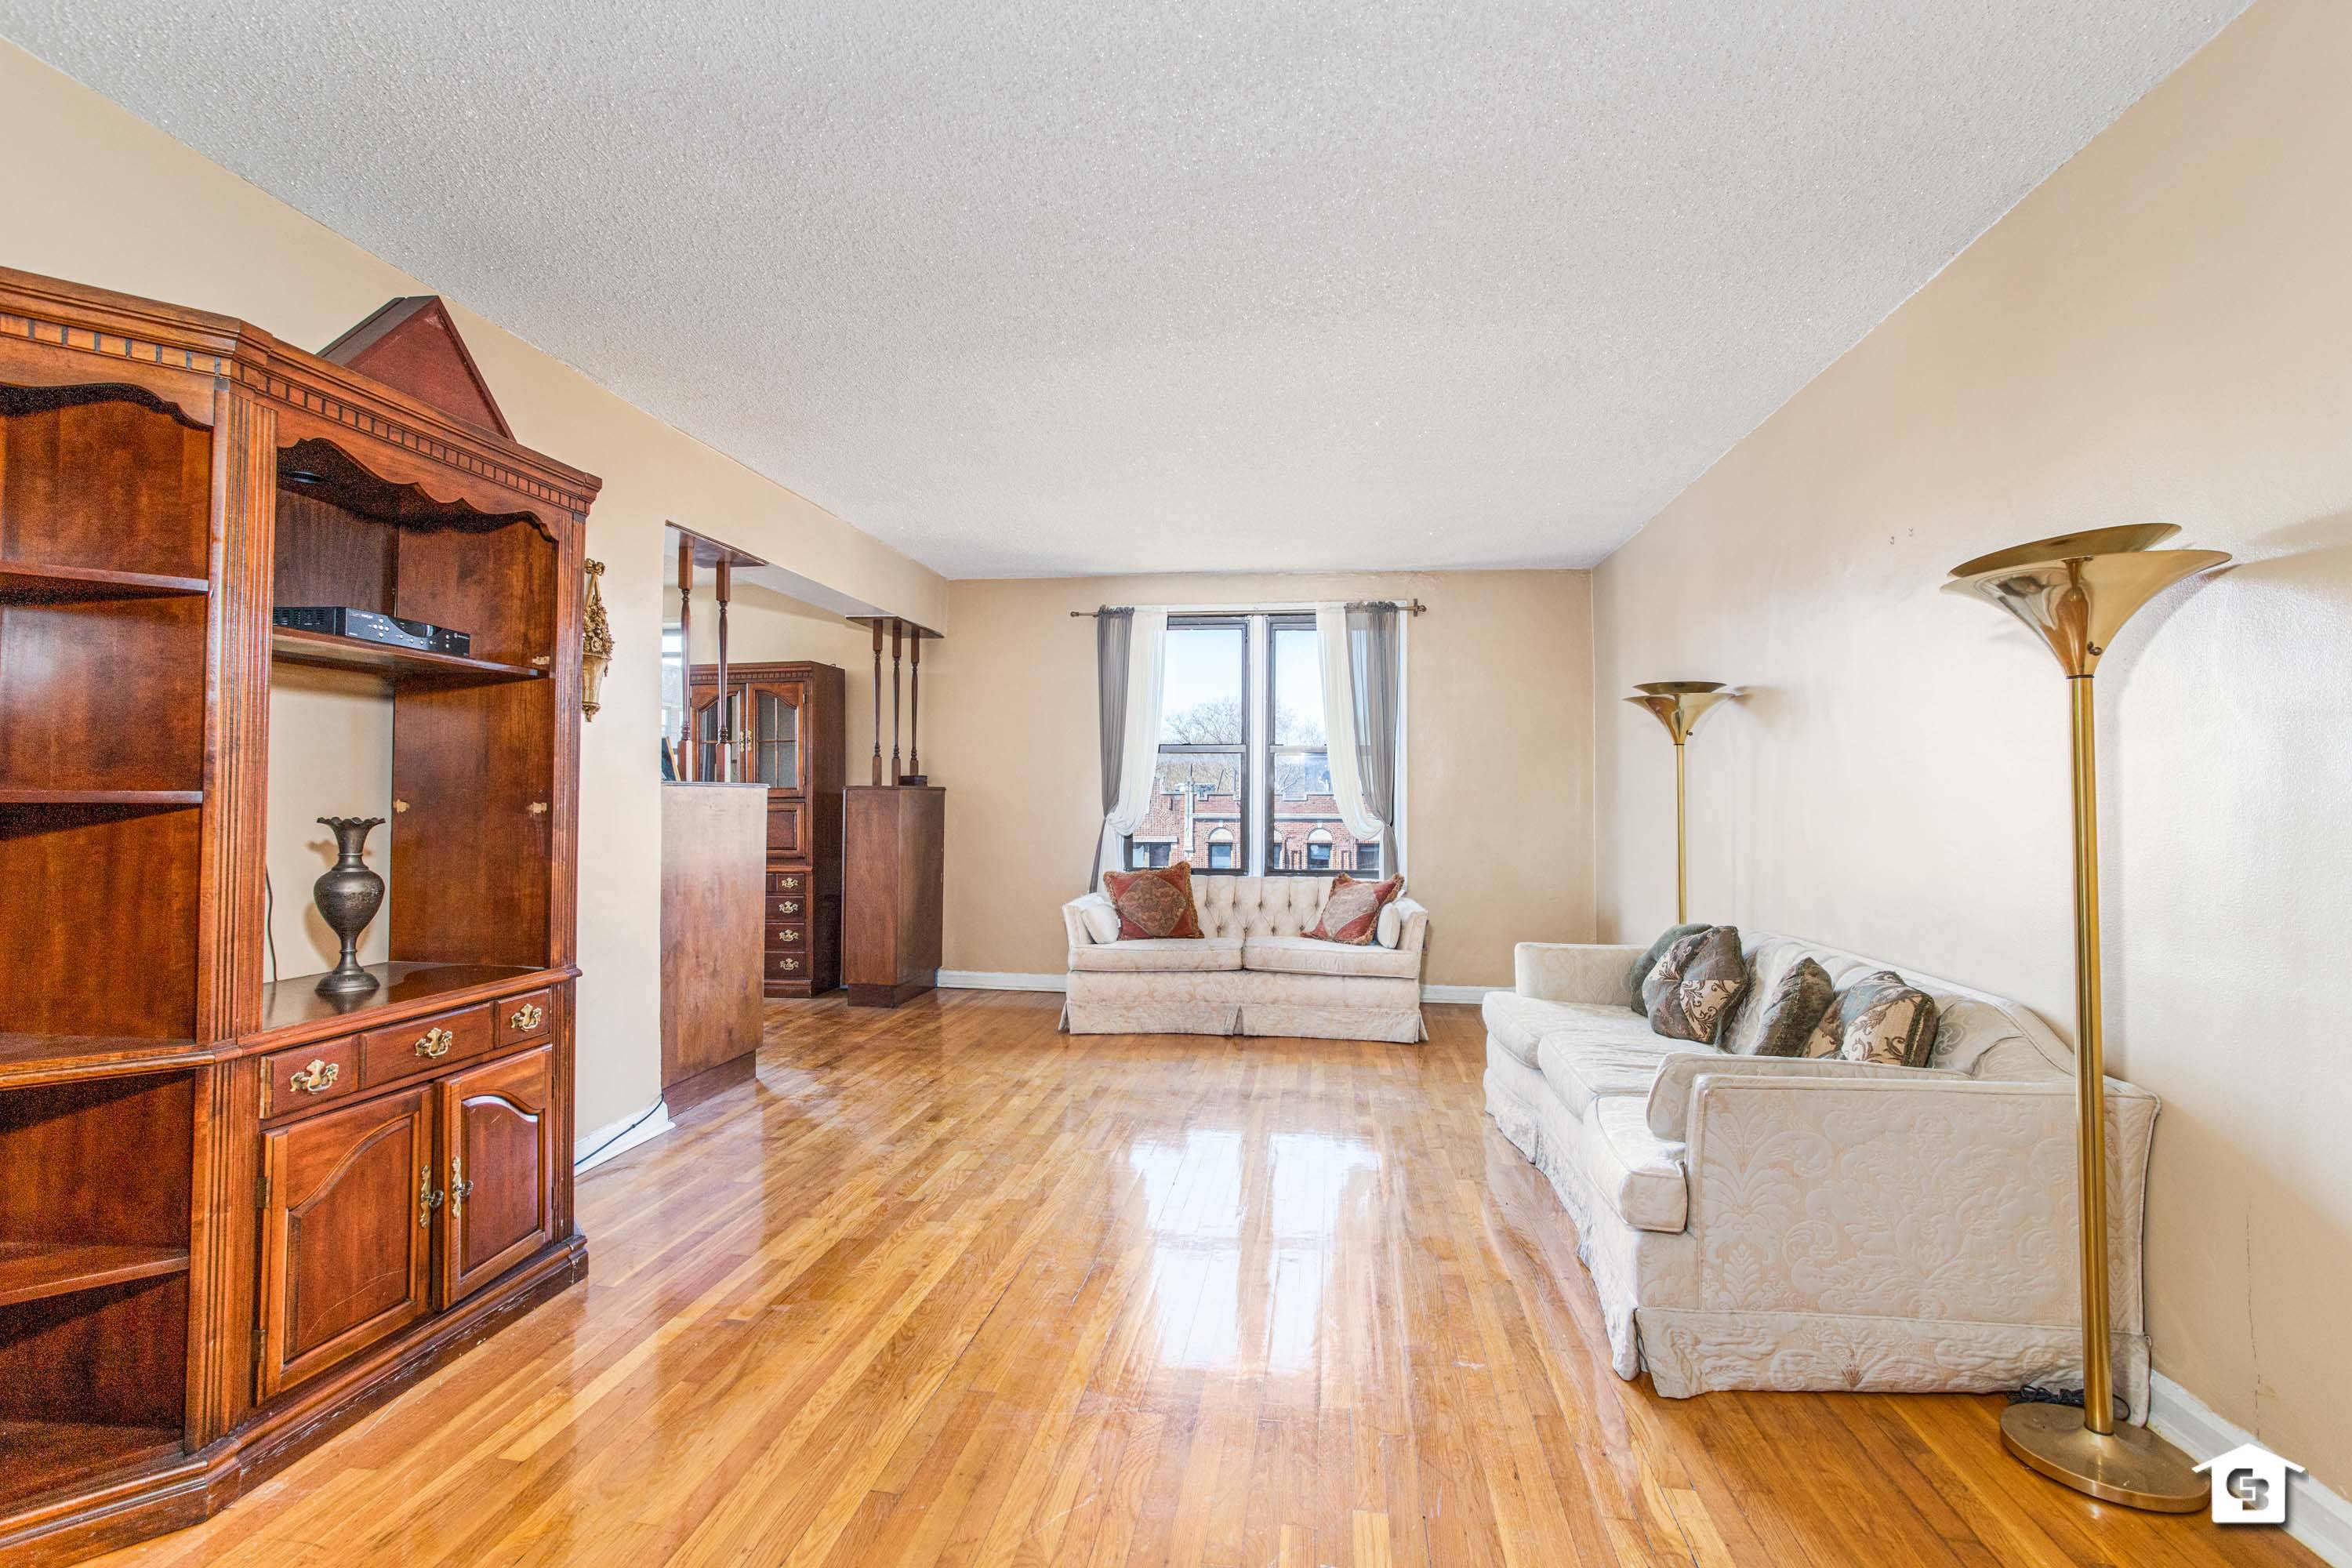 Make this gem your own ! It's a spectacular find in the quaint Ditmas Park neighborhood of Central Brooklyn.